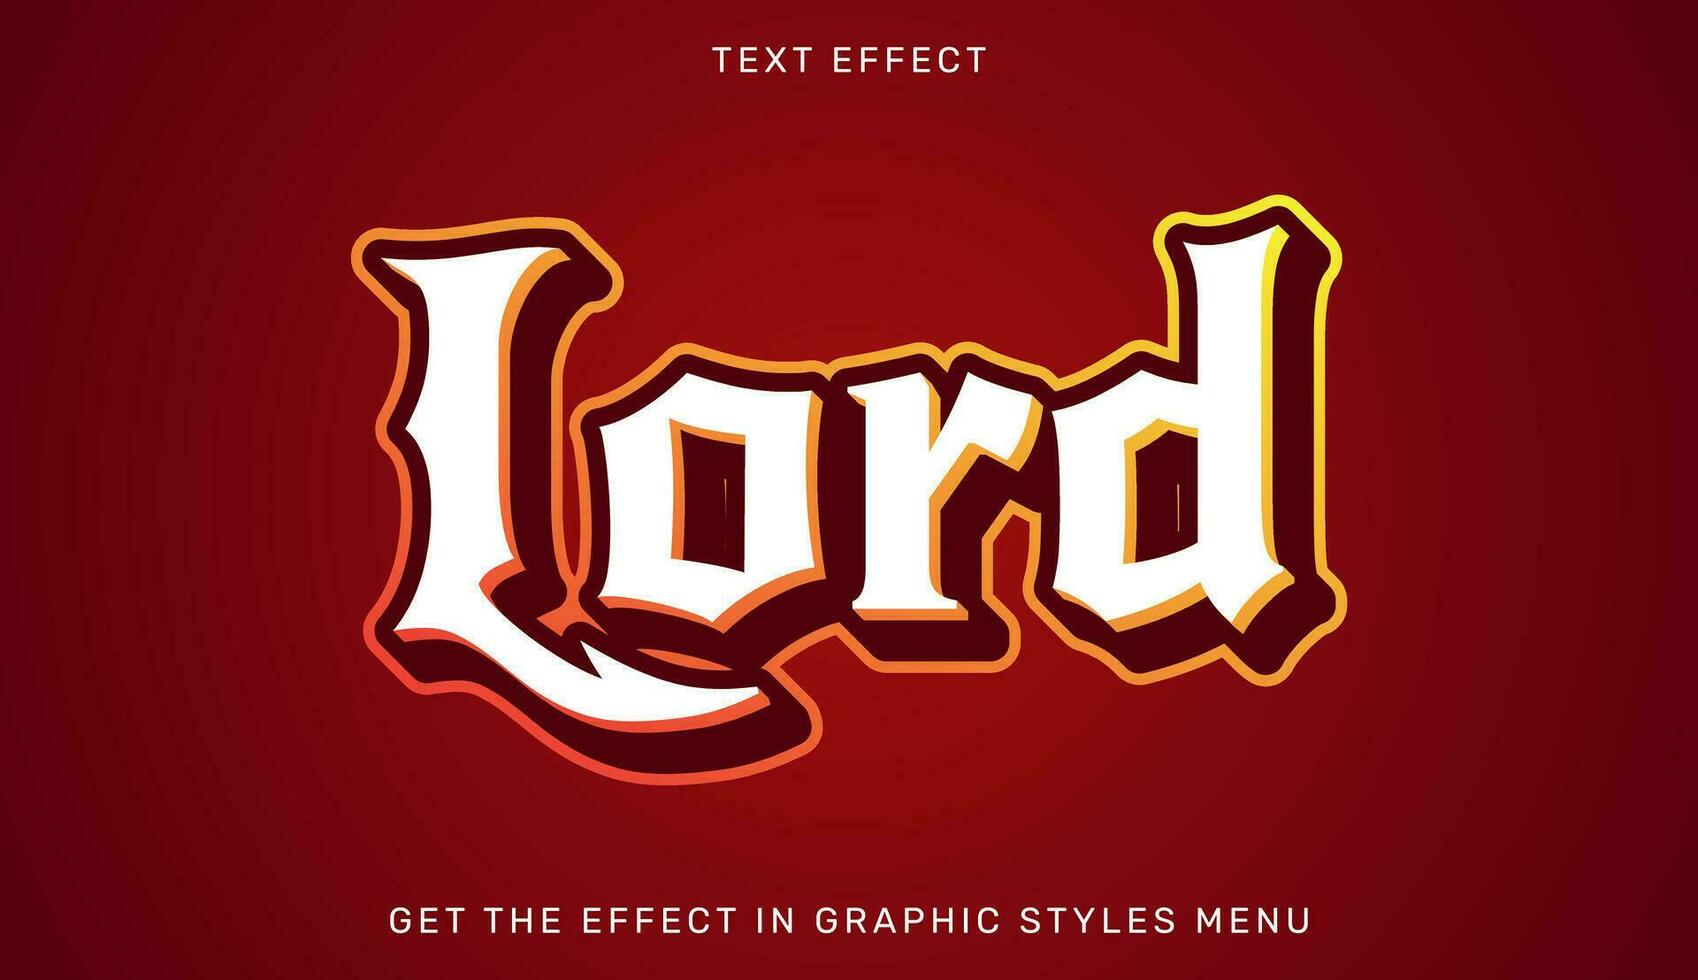 Lord editable text effect in 3d style. Text emblem for advertising, branding and business logo vector